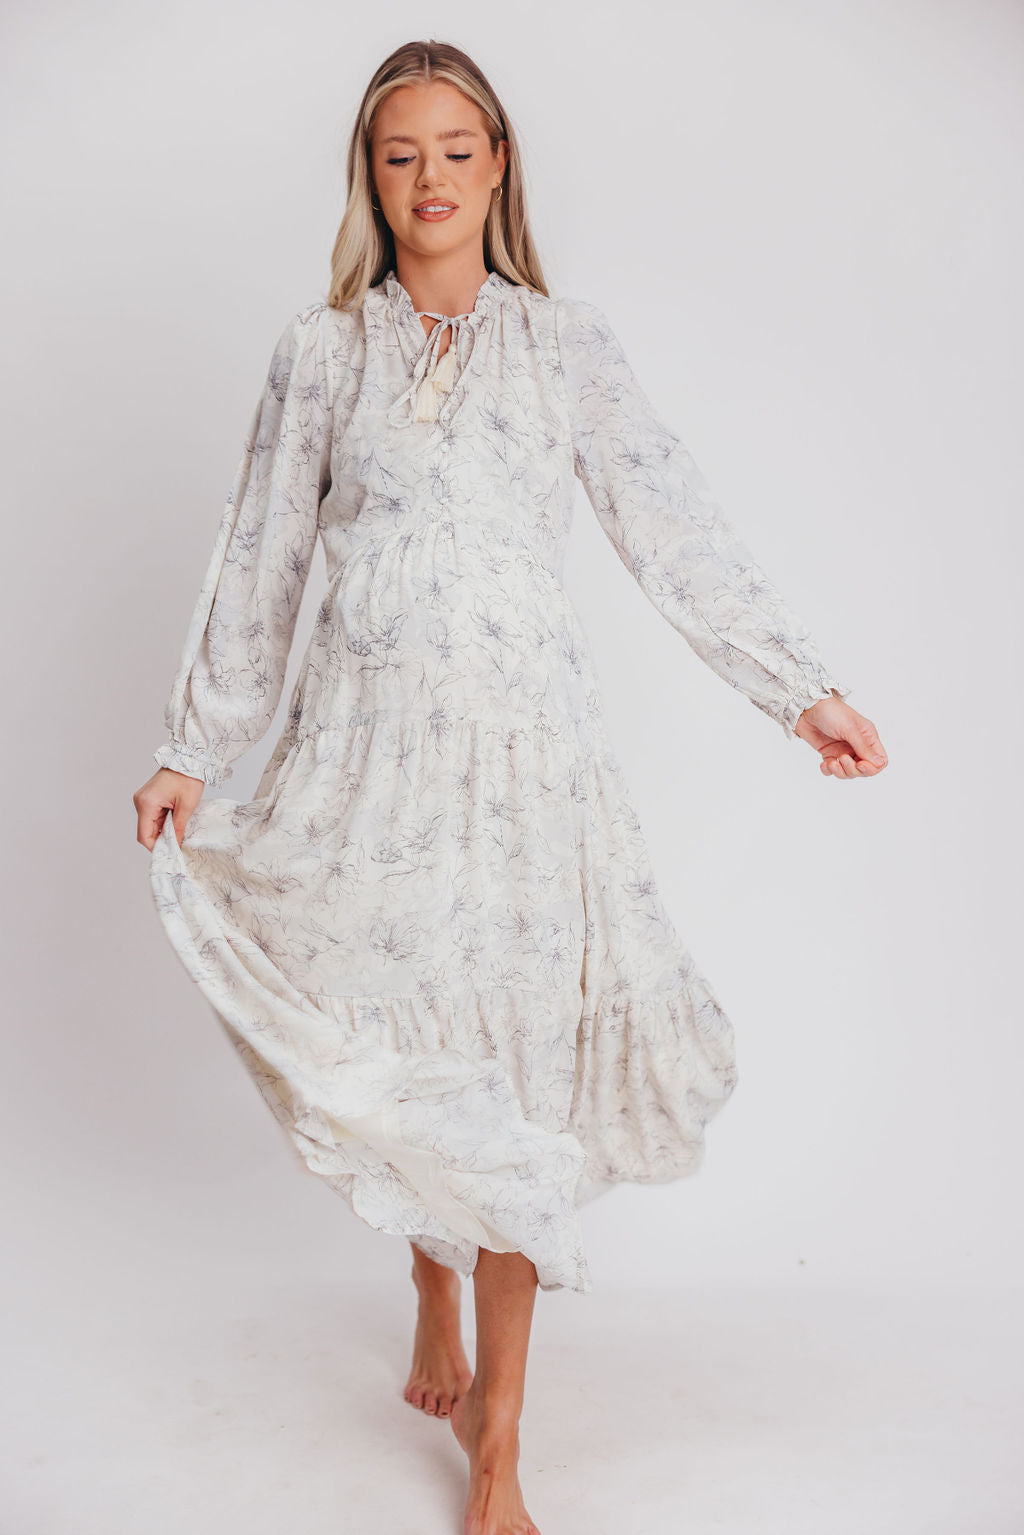 Mallory Long-Sleeved Maxi Dress with Tassel in Grey Floral - Bump Friendly - Inclusive Sizing (S-3XL)